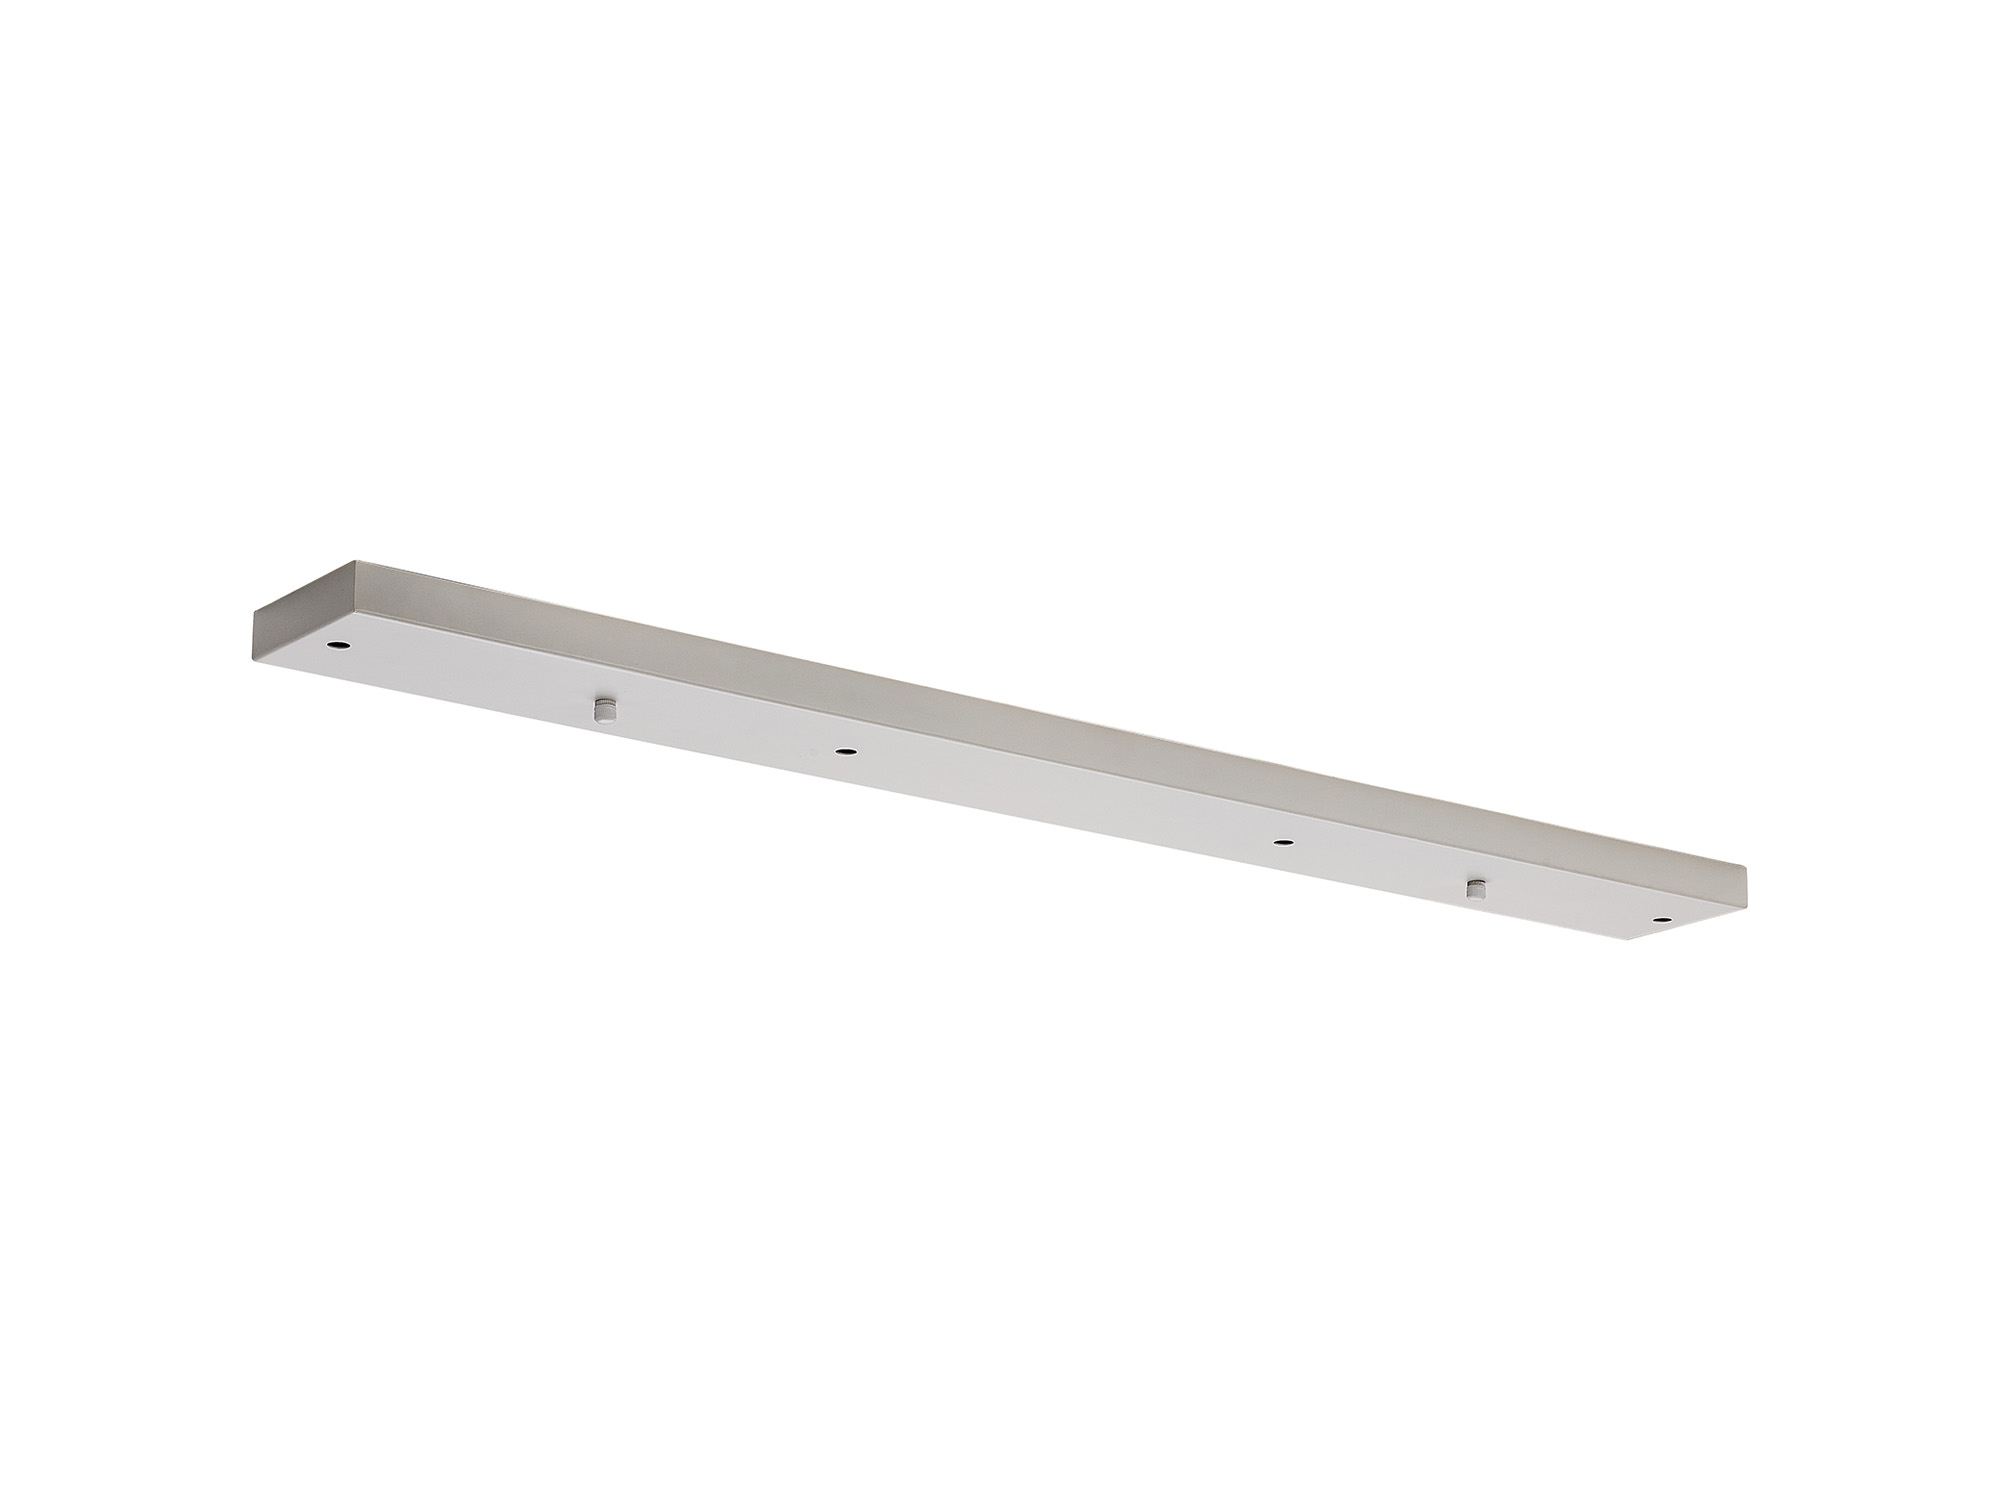 D0833WH  Hayes 4 Hole 900 x 100mm Linear Ceiling Plate White